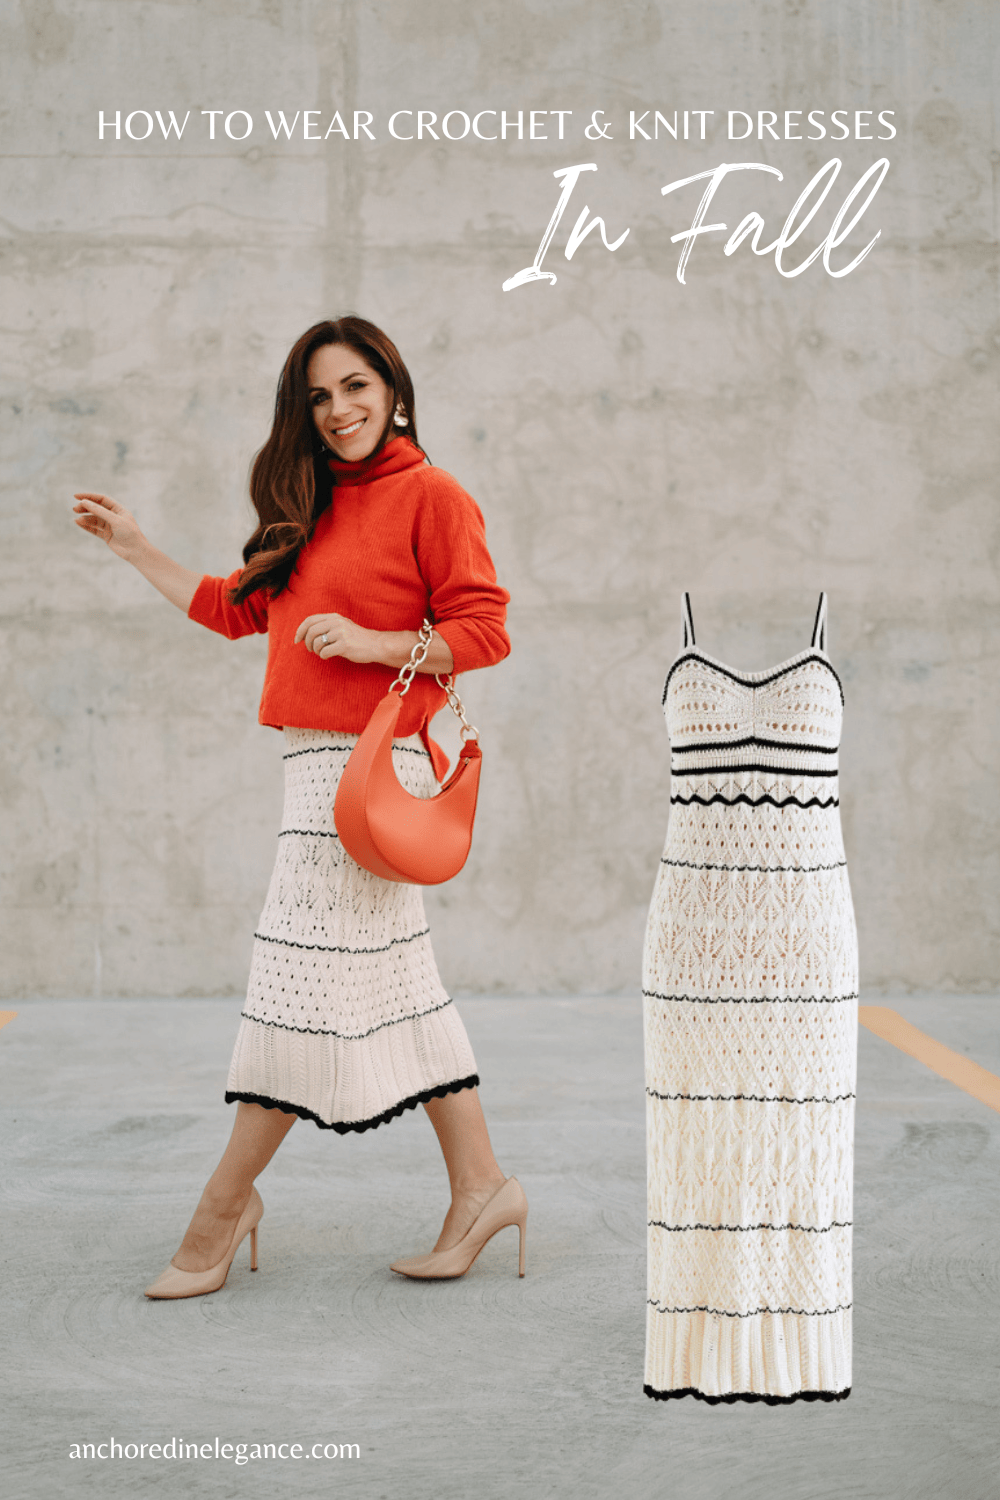 How to Wear Crochet Dresses in Fall - Anchored In Elegance